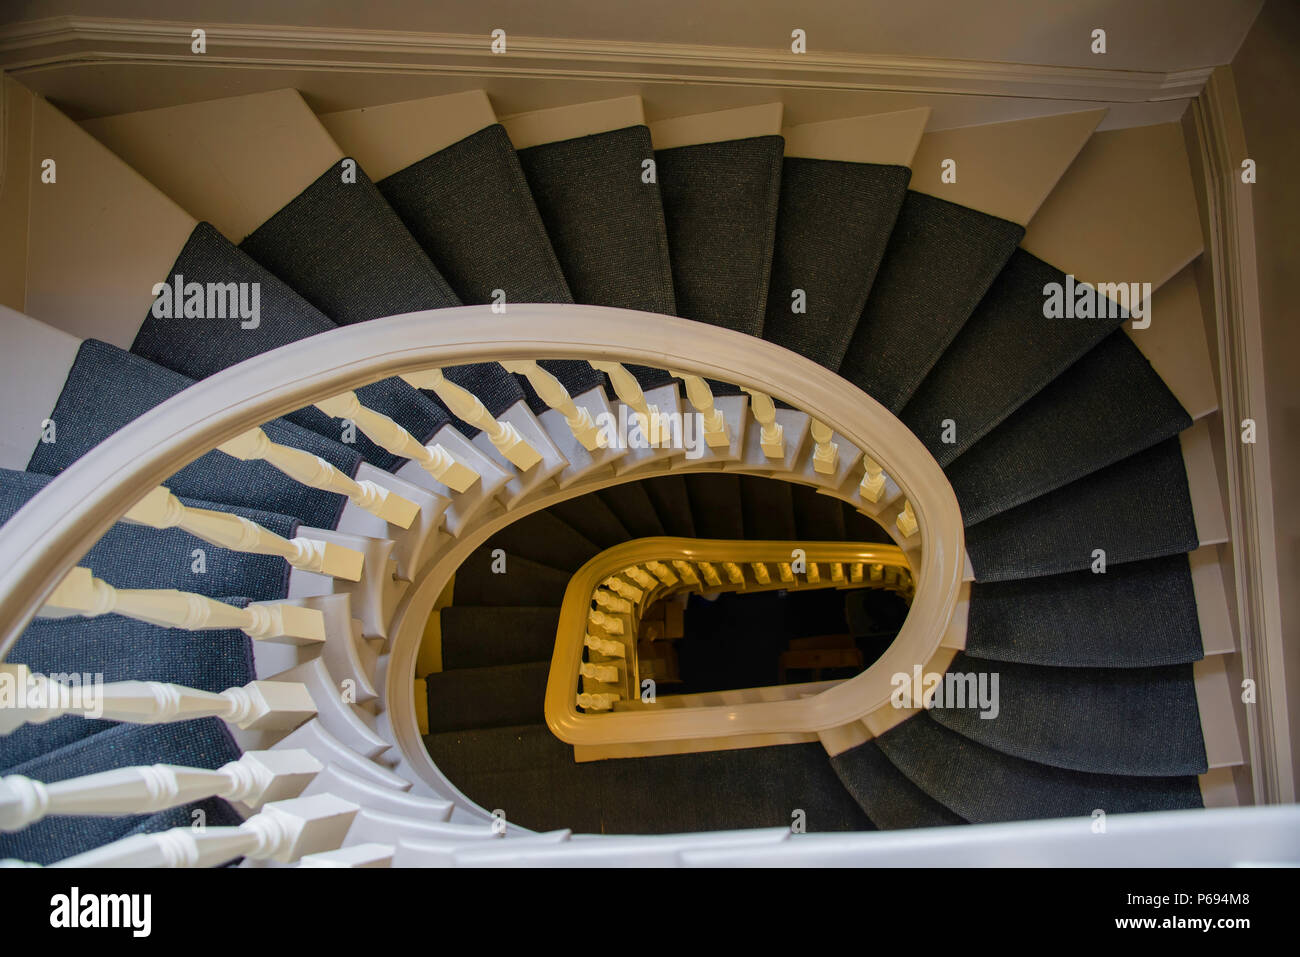 Reconditioned indoor staircase with balustrades and pale decor Stock Photo